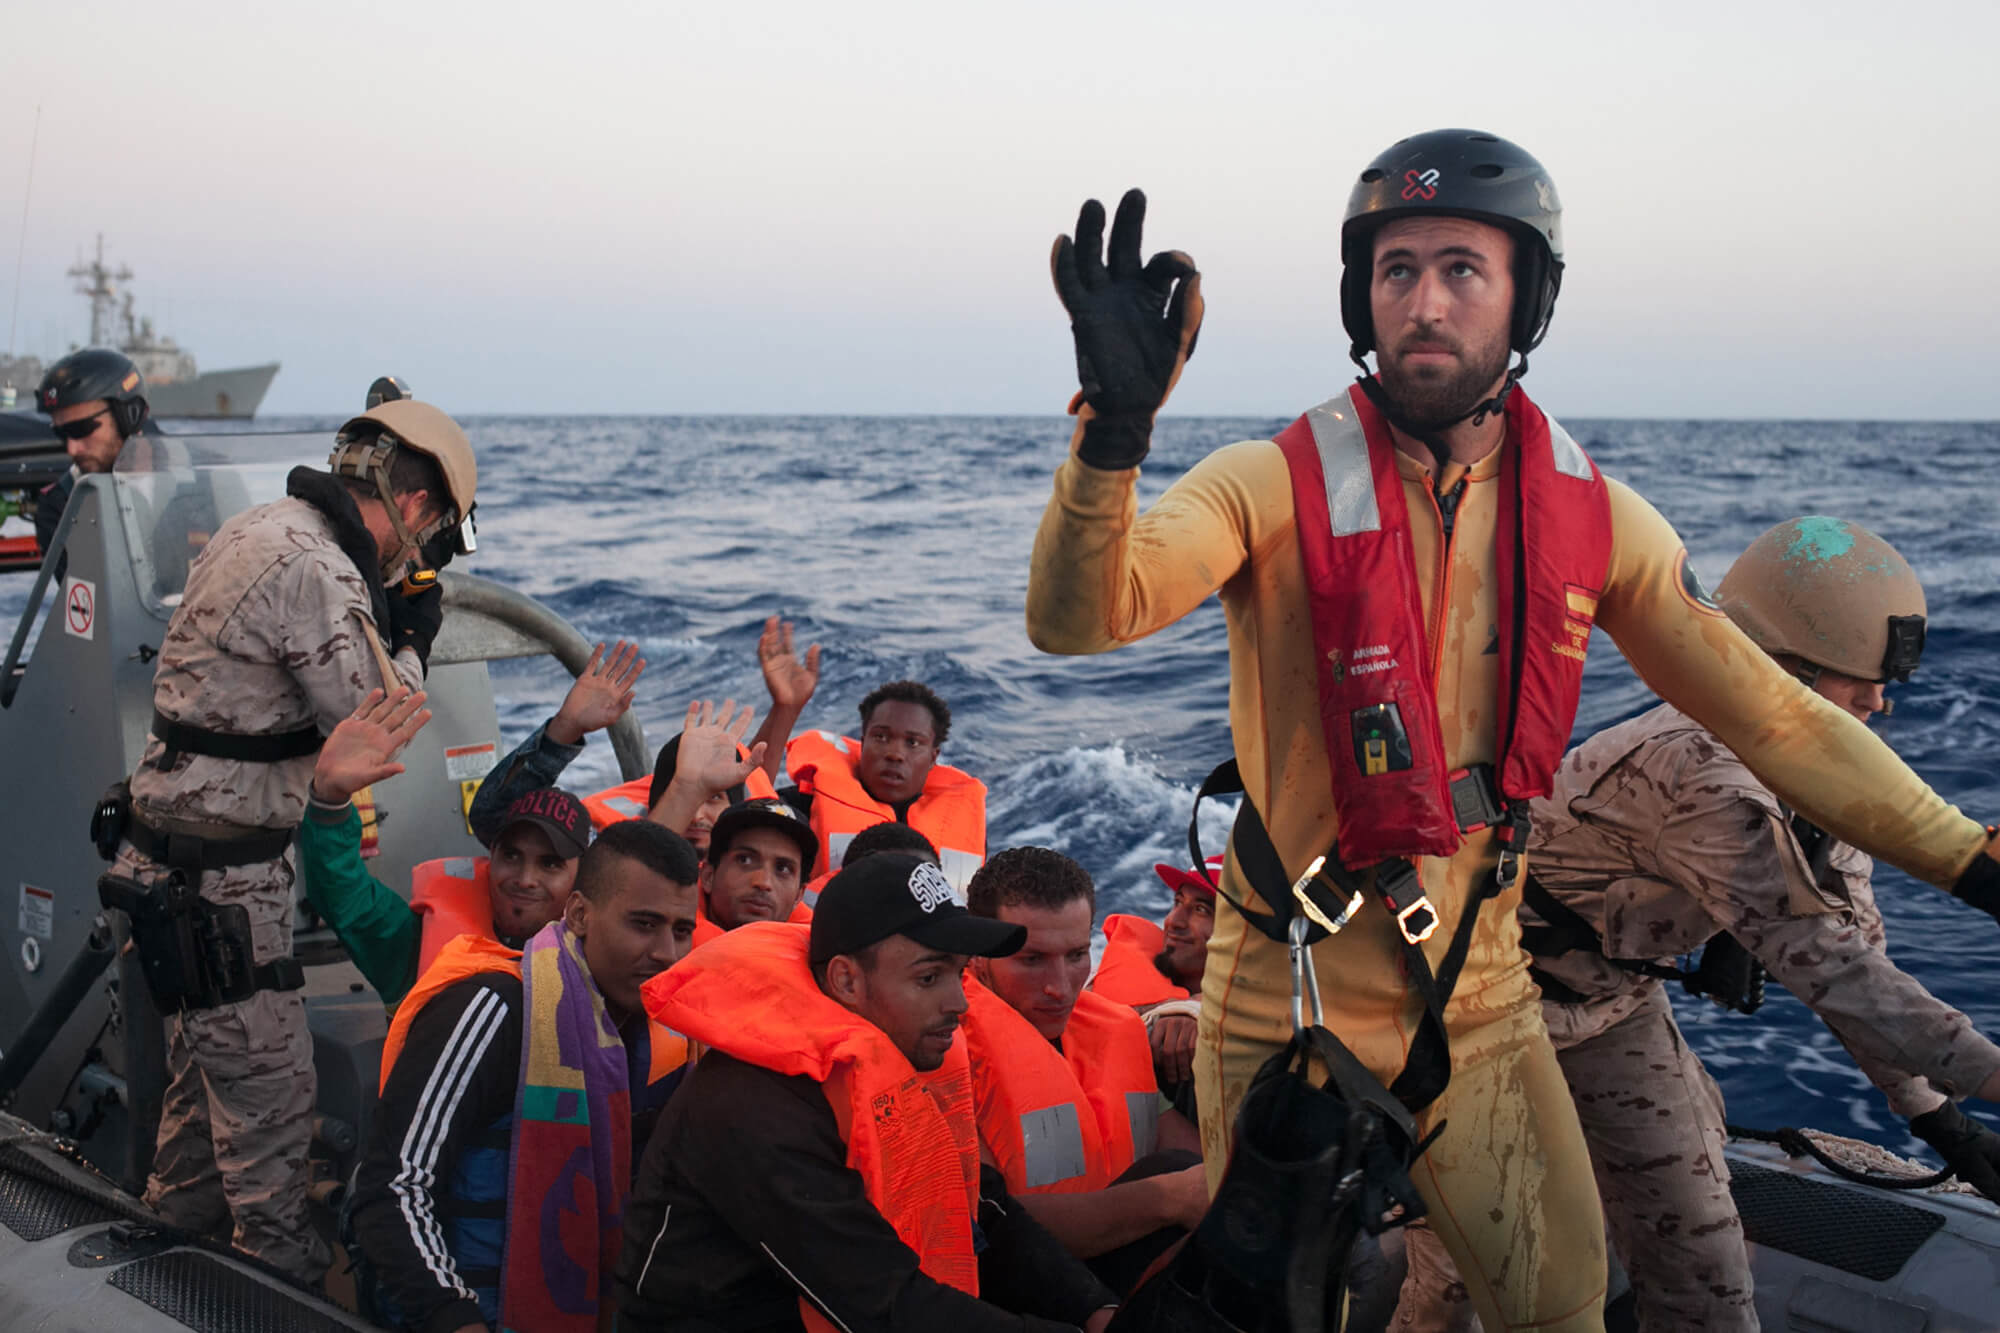 A person from the other rescue team show a perfect symbol with high handy. In the background the rescued migrants and some other people are on the RHIB.